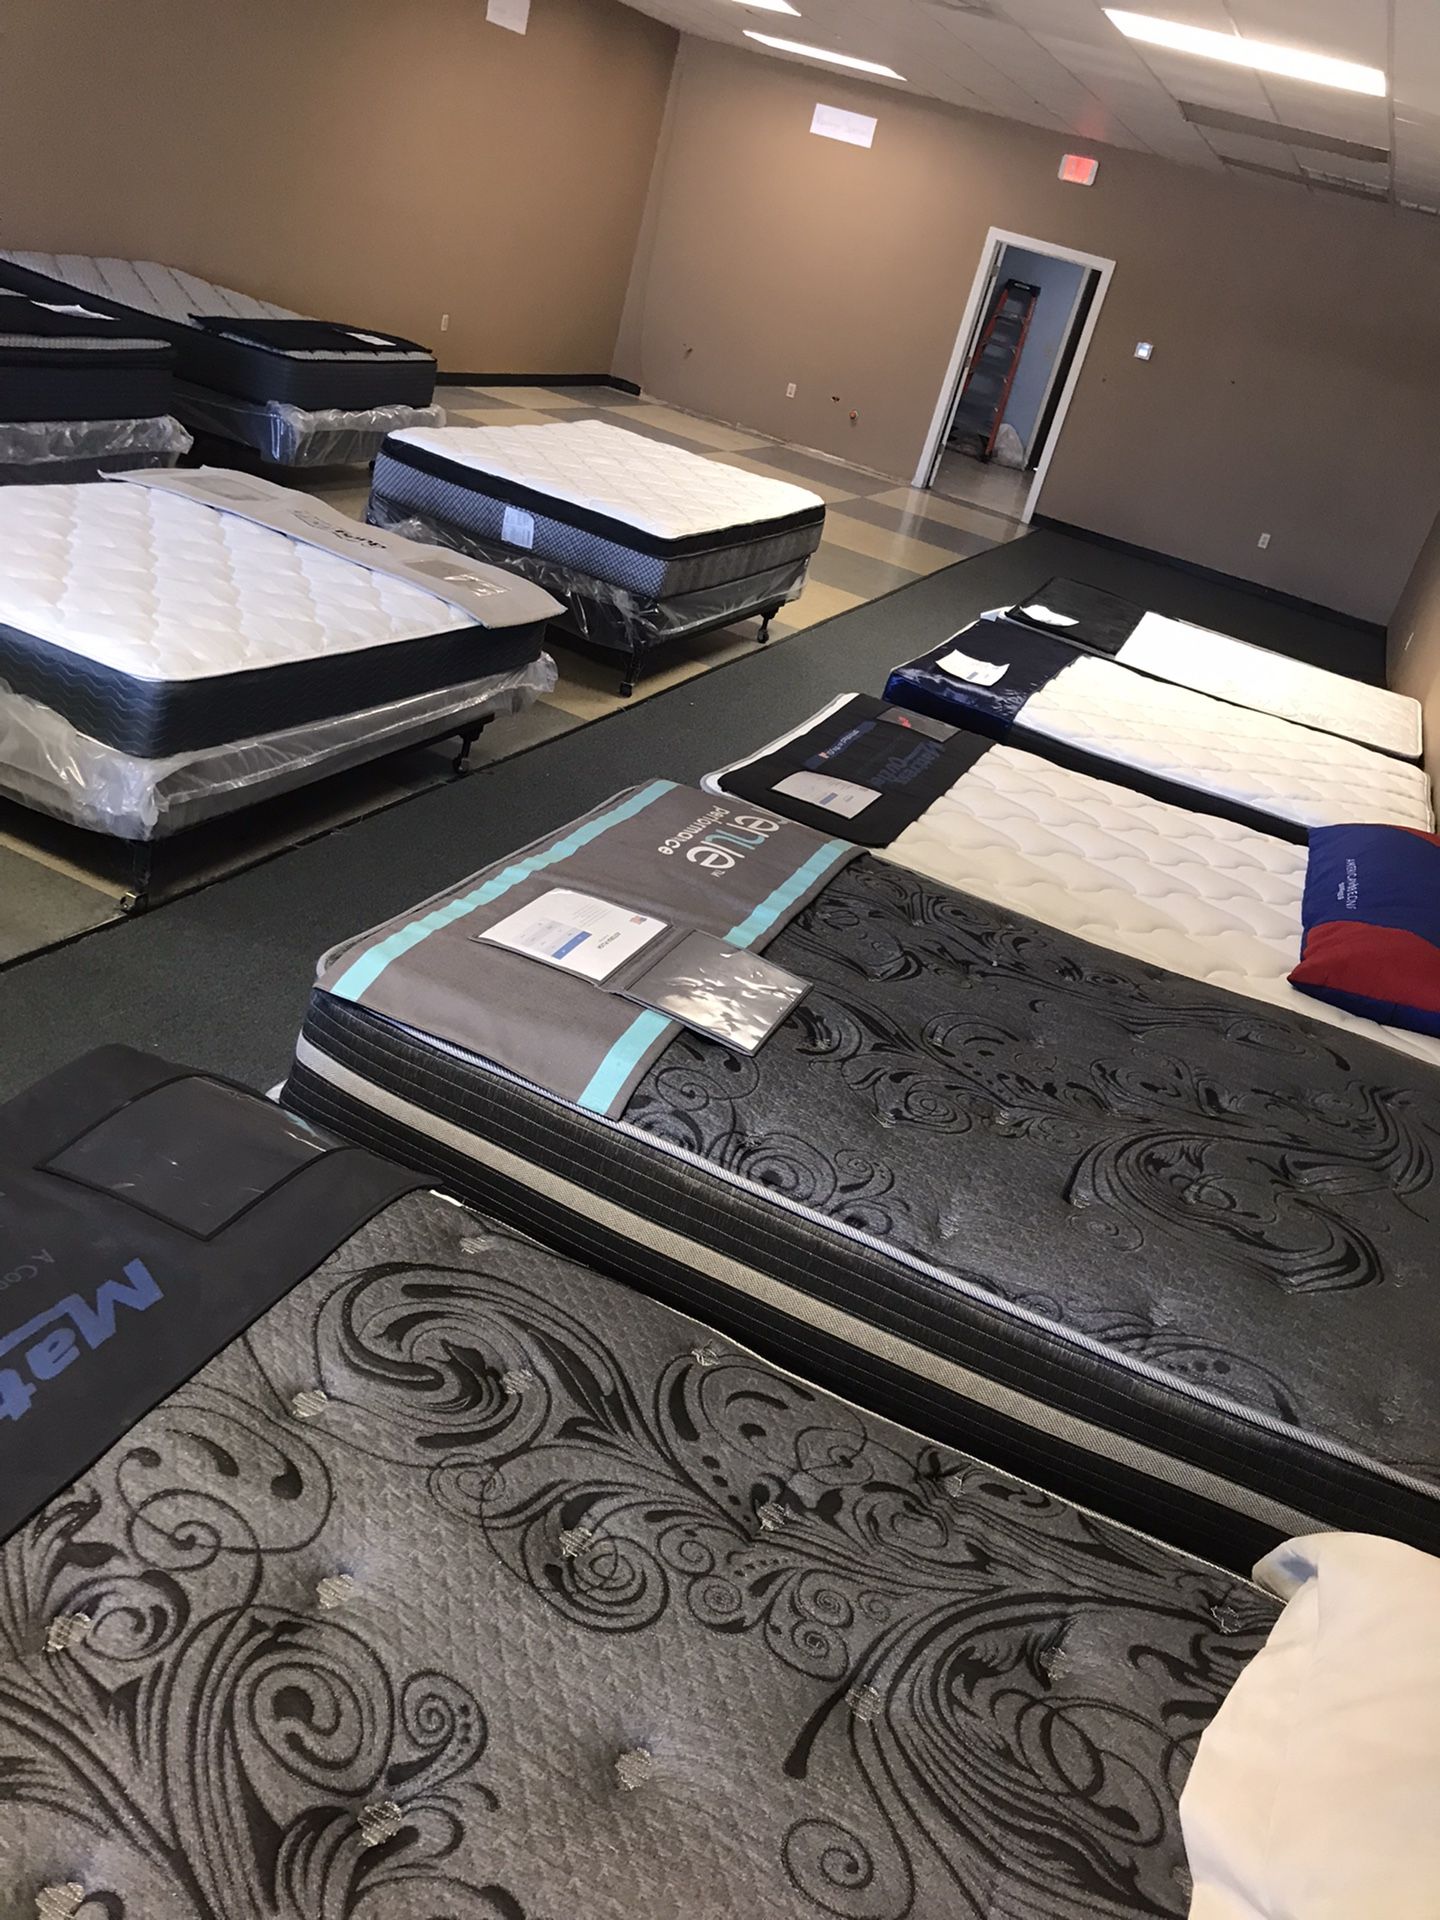 🔥Brand New Full Mattresses Starting At $109 (all sizes available)🔥